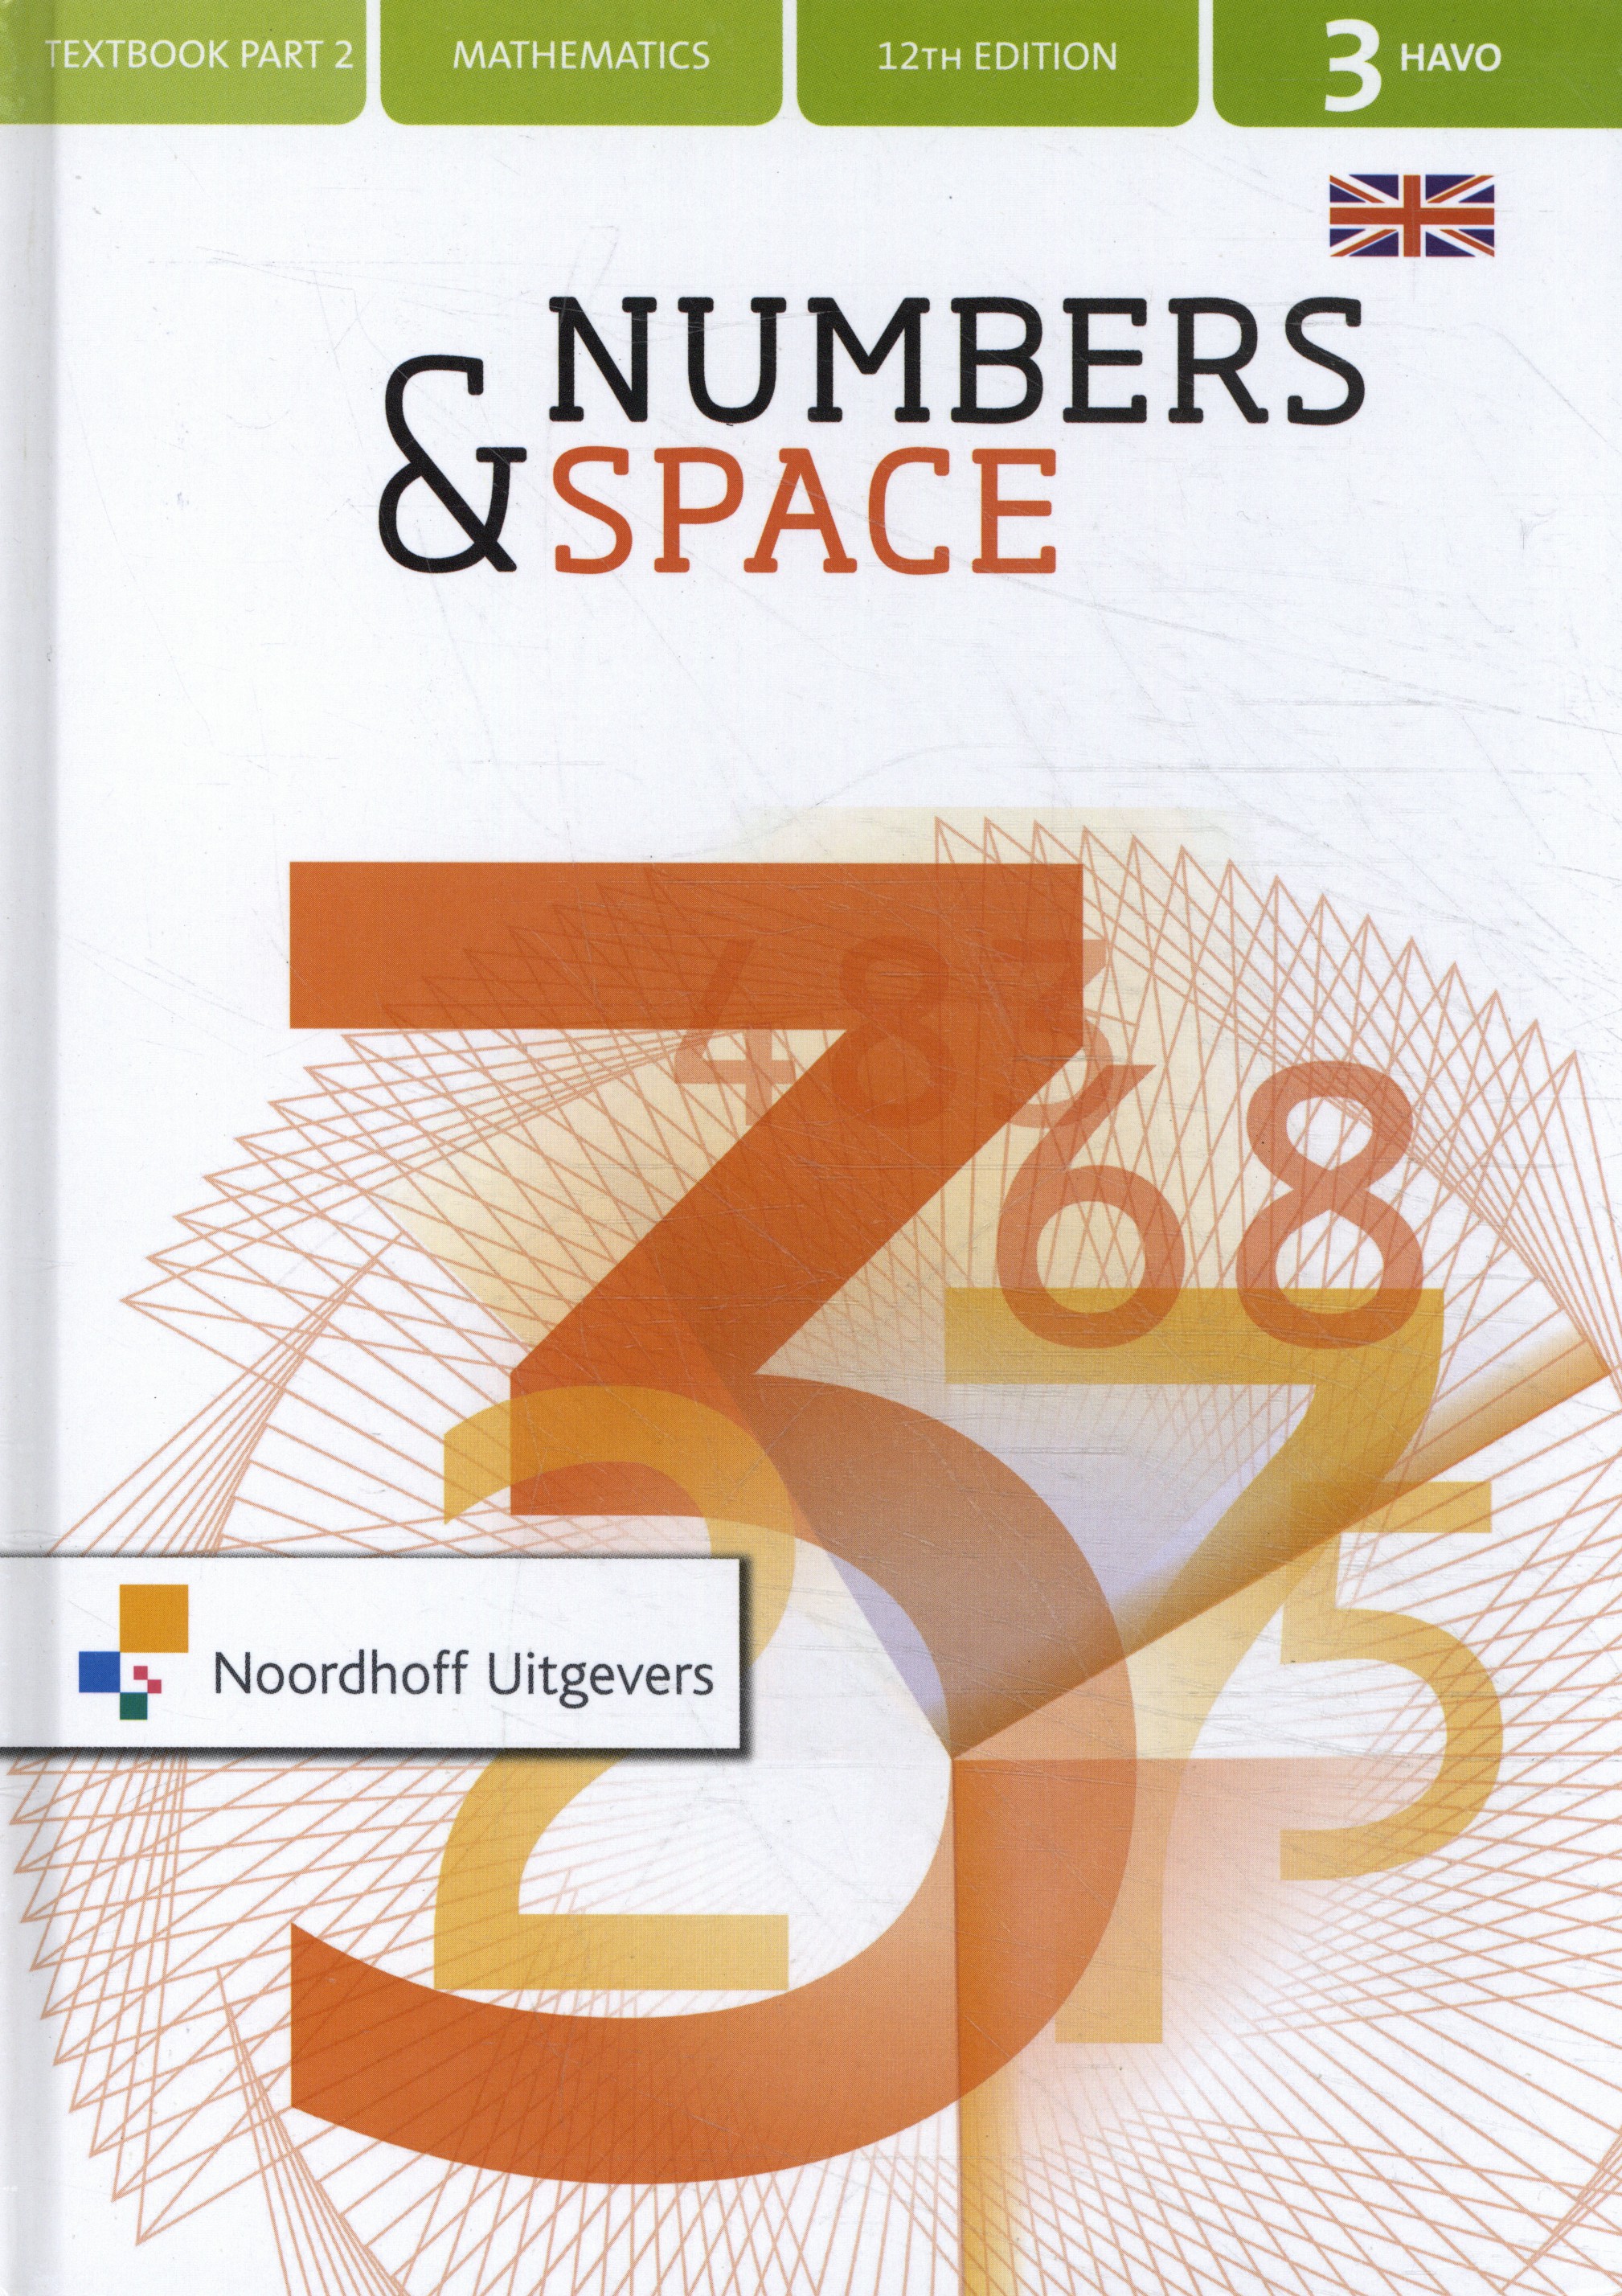 Numbers & Space 3 havo part 2 Textbook